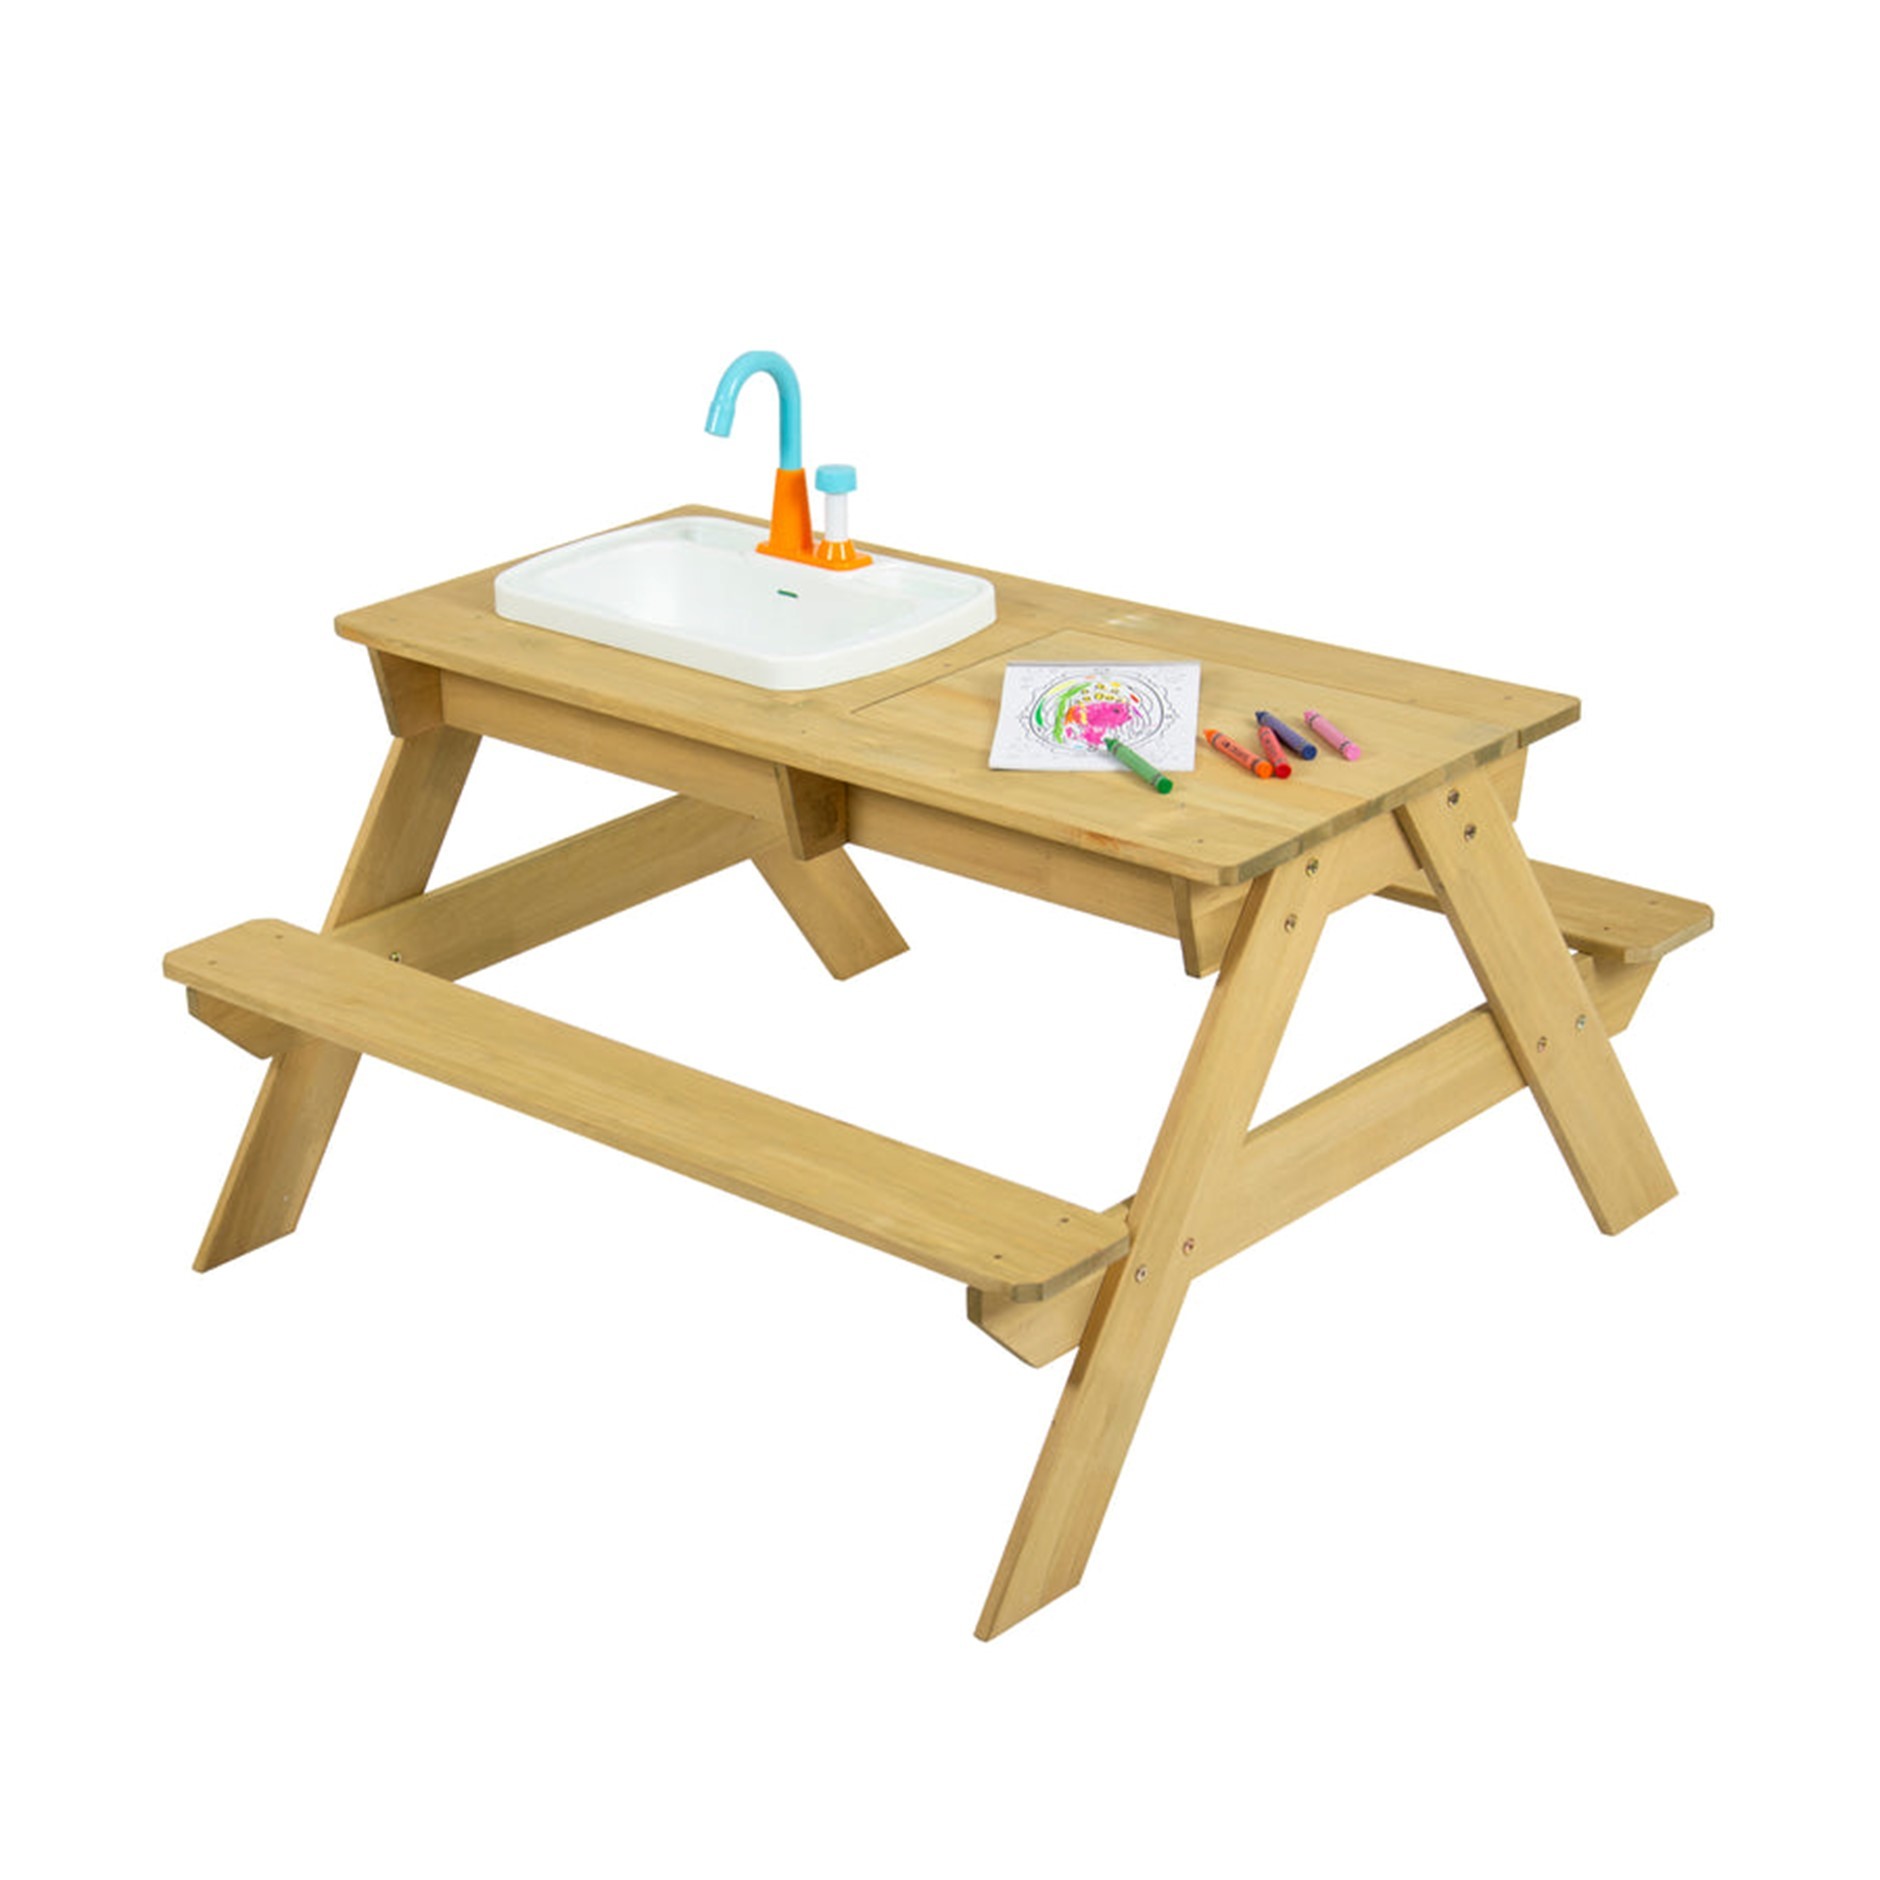 TP Multi Activity Sand And Water Picnic Bench